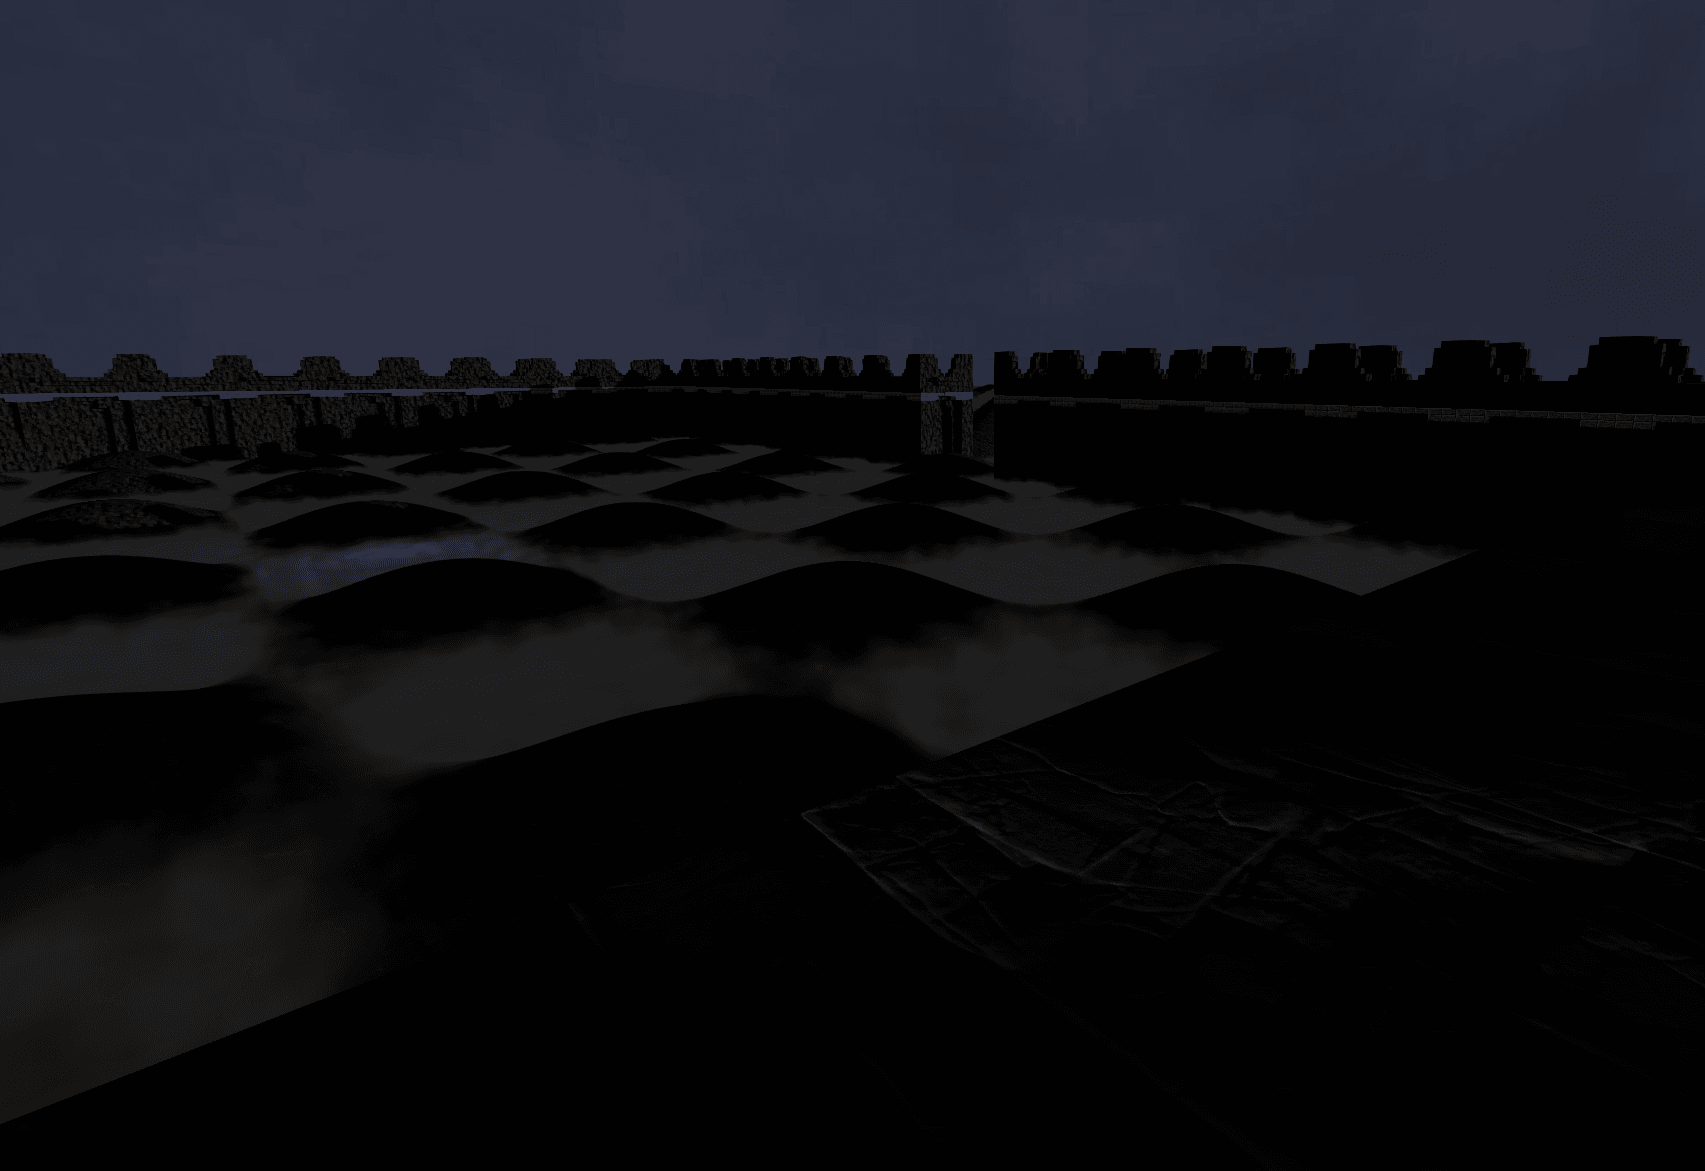 Screenshot of a scene rendered using Three.JS using the volumetric fog shader I developed.  The ground is made out of black rock and has hills in a checkerboard pattern. Gray-white fluffy fog is present in the low parts of the terrain, and there is a bright pink light shining on the fog's surface in one of the squares.  There is a stone wall surrounding the terrain, and the perspective of the scene is from on top of this wall.